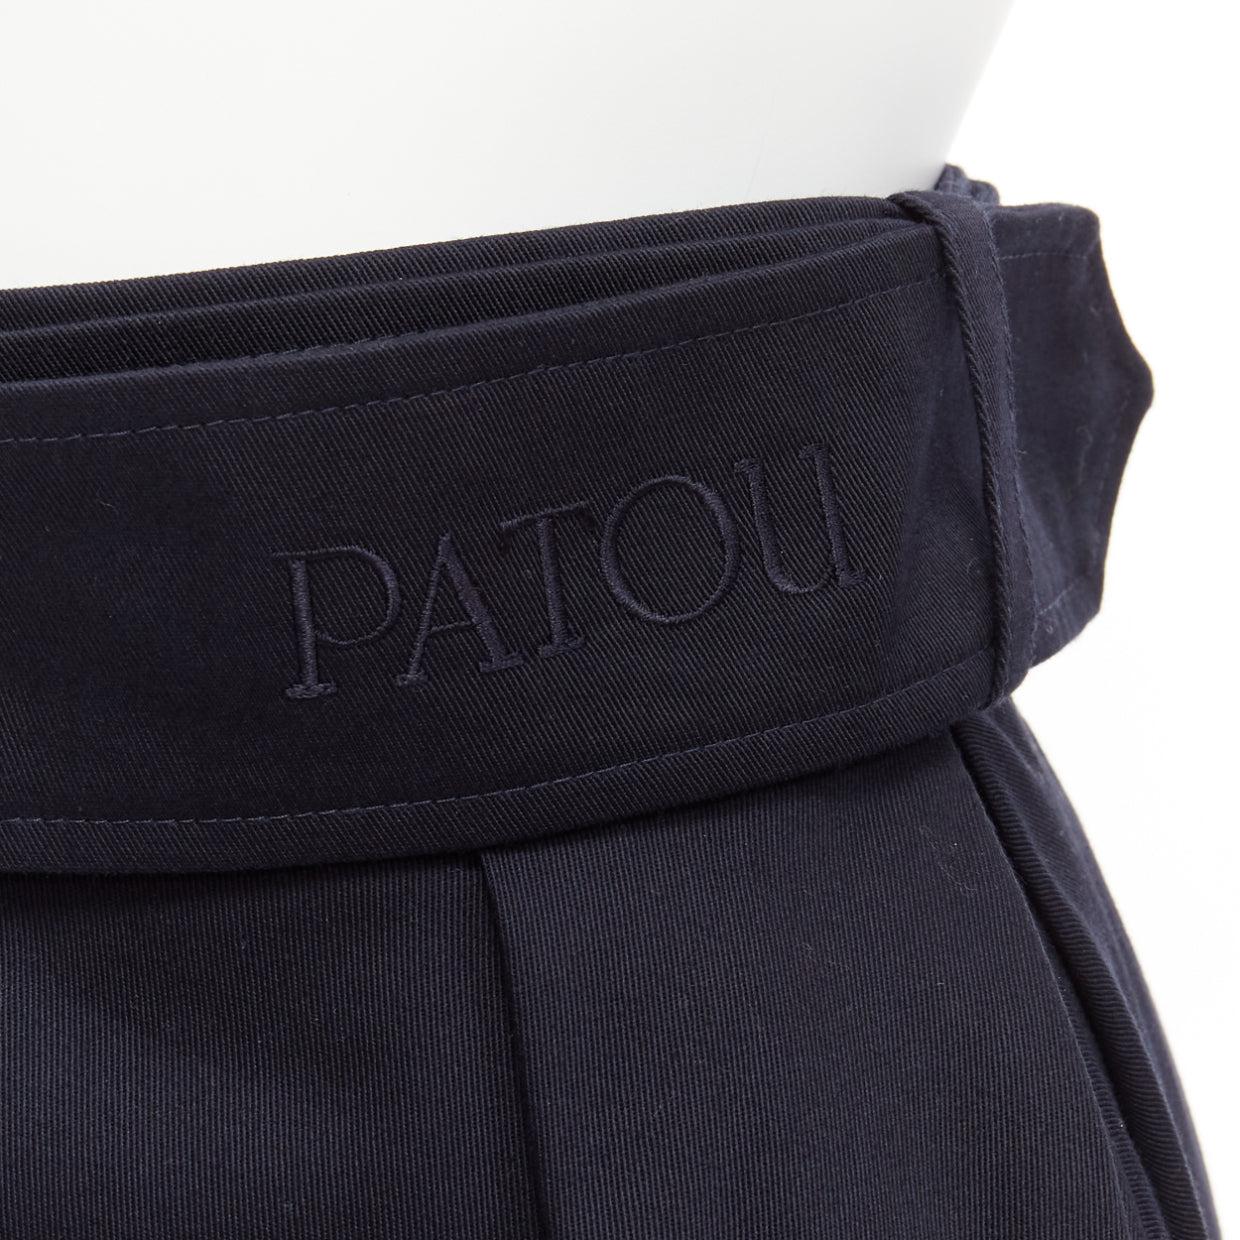 PATOU black 100% cotton button down box pleat belted mini skirt FR34 XS
Reference: AAWC/A00842
Brand: Patou
Material: Cotton
Color: Black
Pattern: Solid
Closure: Button
Lining: Black Fabric
Extra Details: Detachable belt. Pleats at back.
Made in: